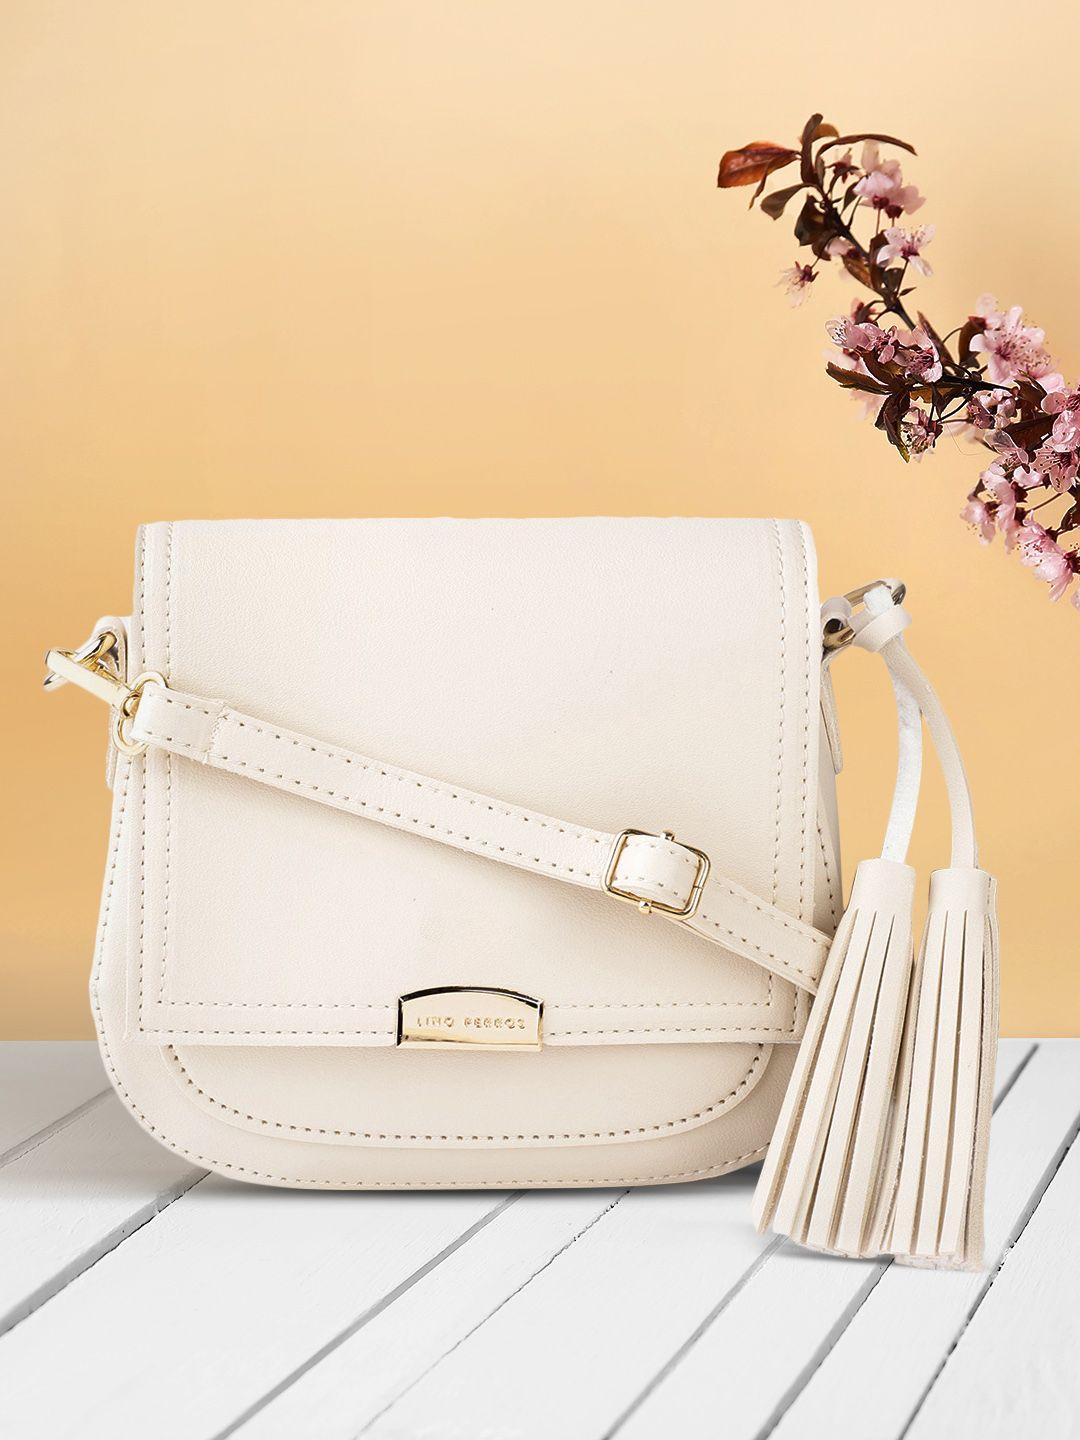 lino perros women cream-coloured solid sling bag with tasselled detail